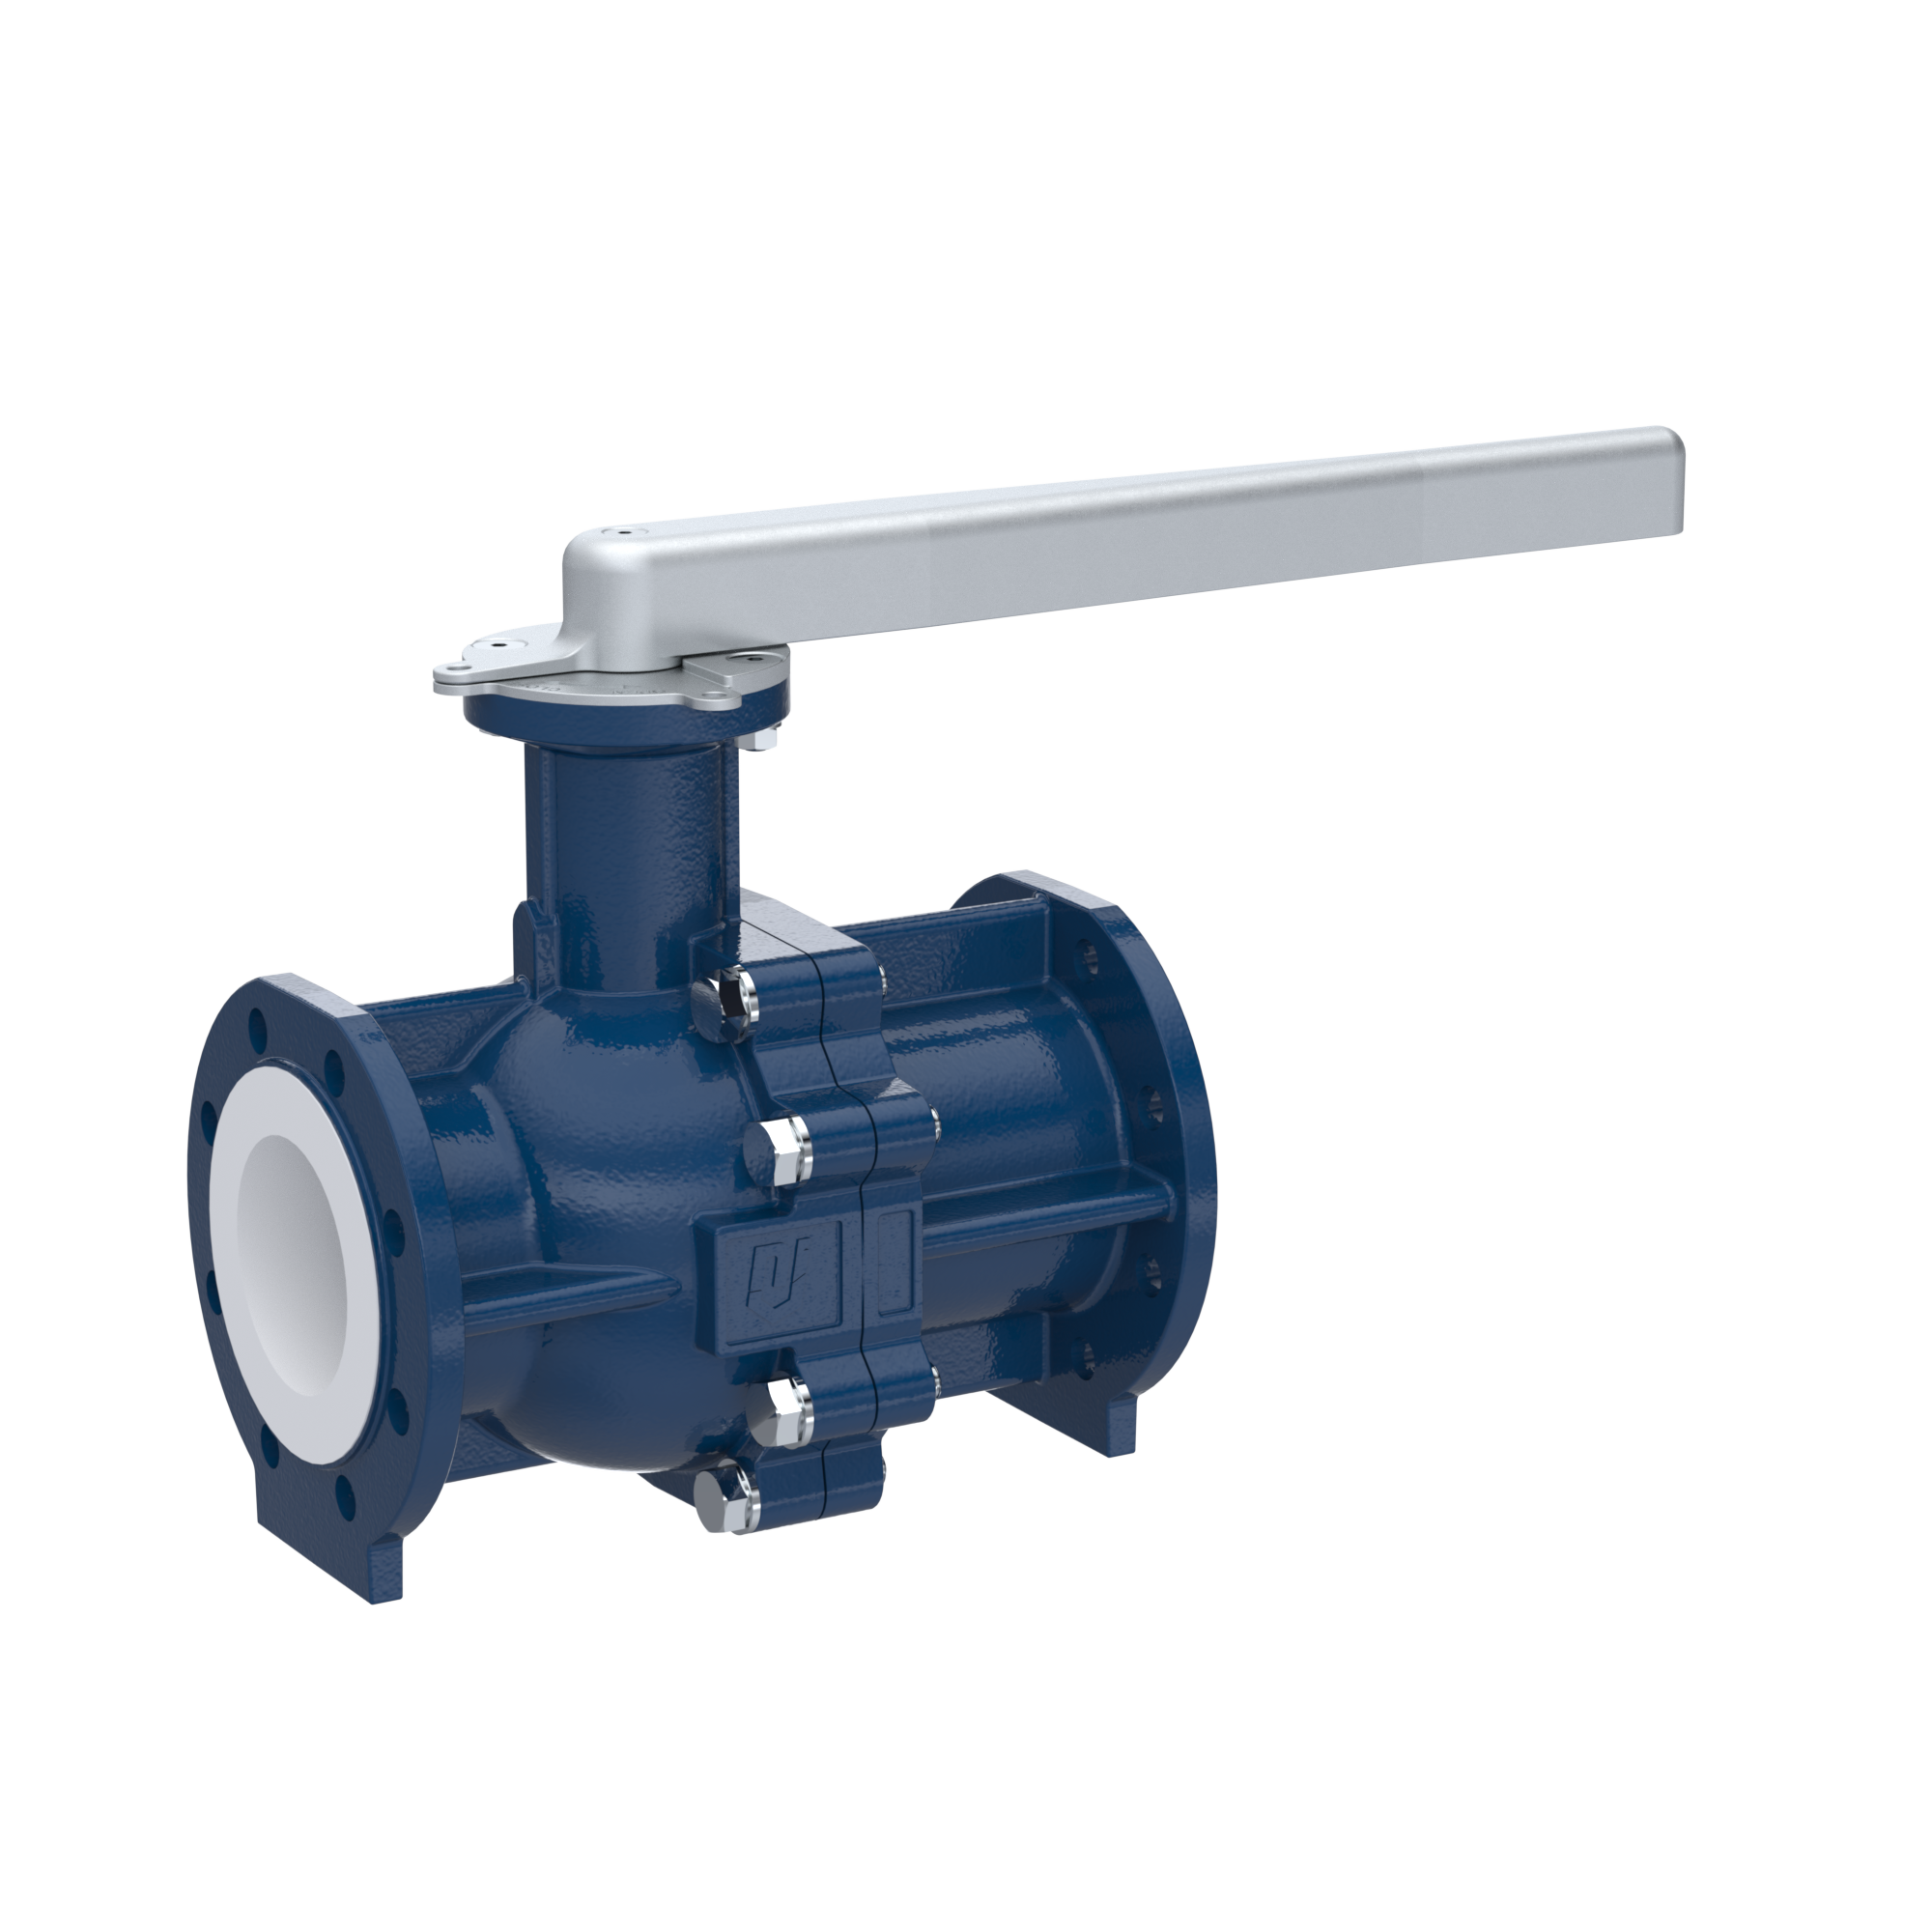 PFA-flange ball valve FK13 DN100 - 4" inch PN10/16 made of spheroidal graphite cast iron with lever hand